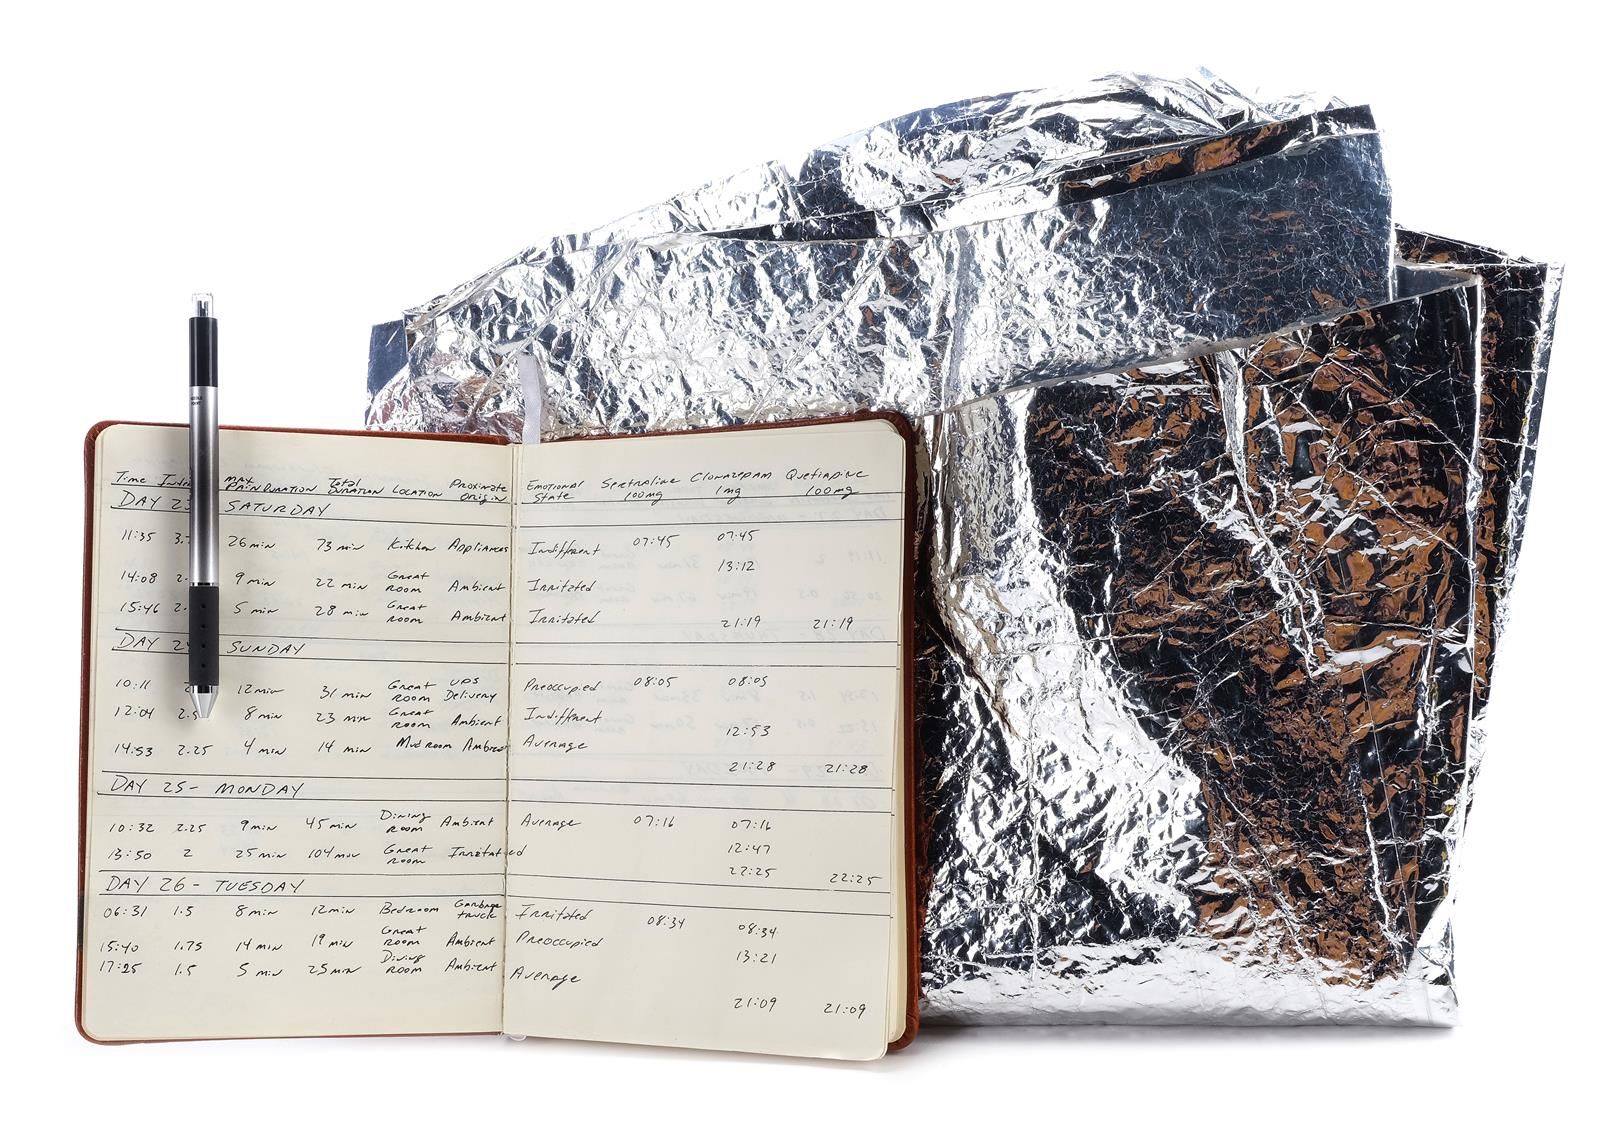 better-call-saul-auction-charles-mcgill-journal-space-blanket